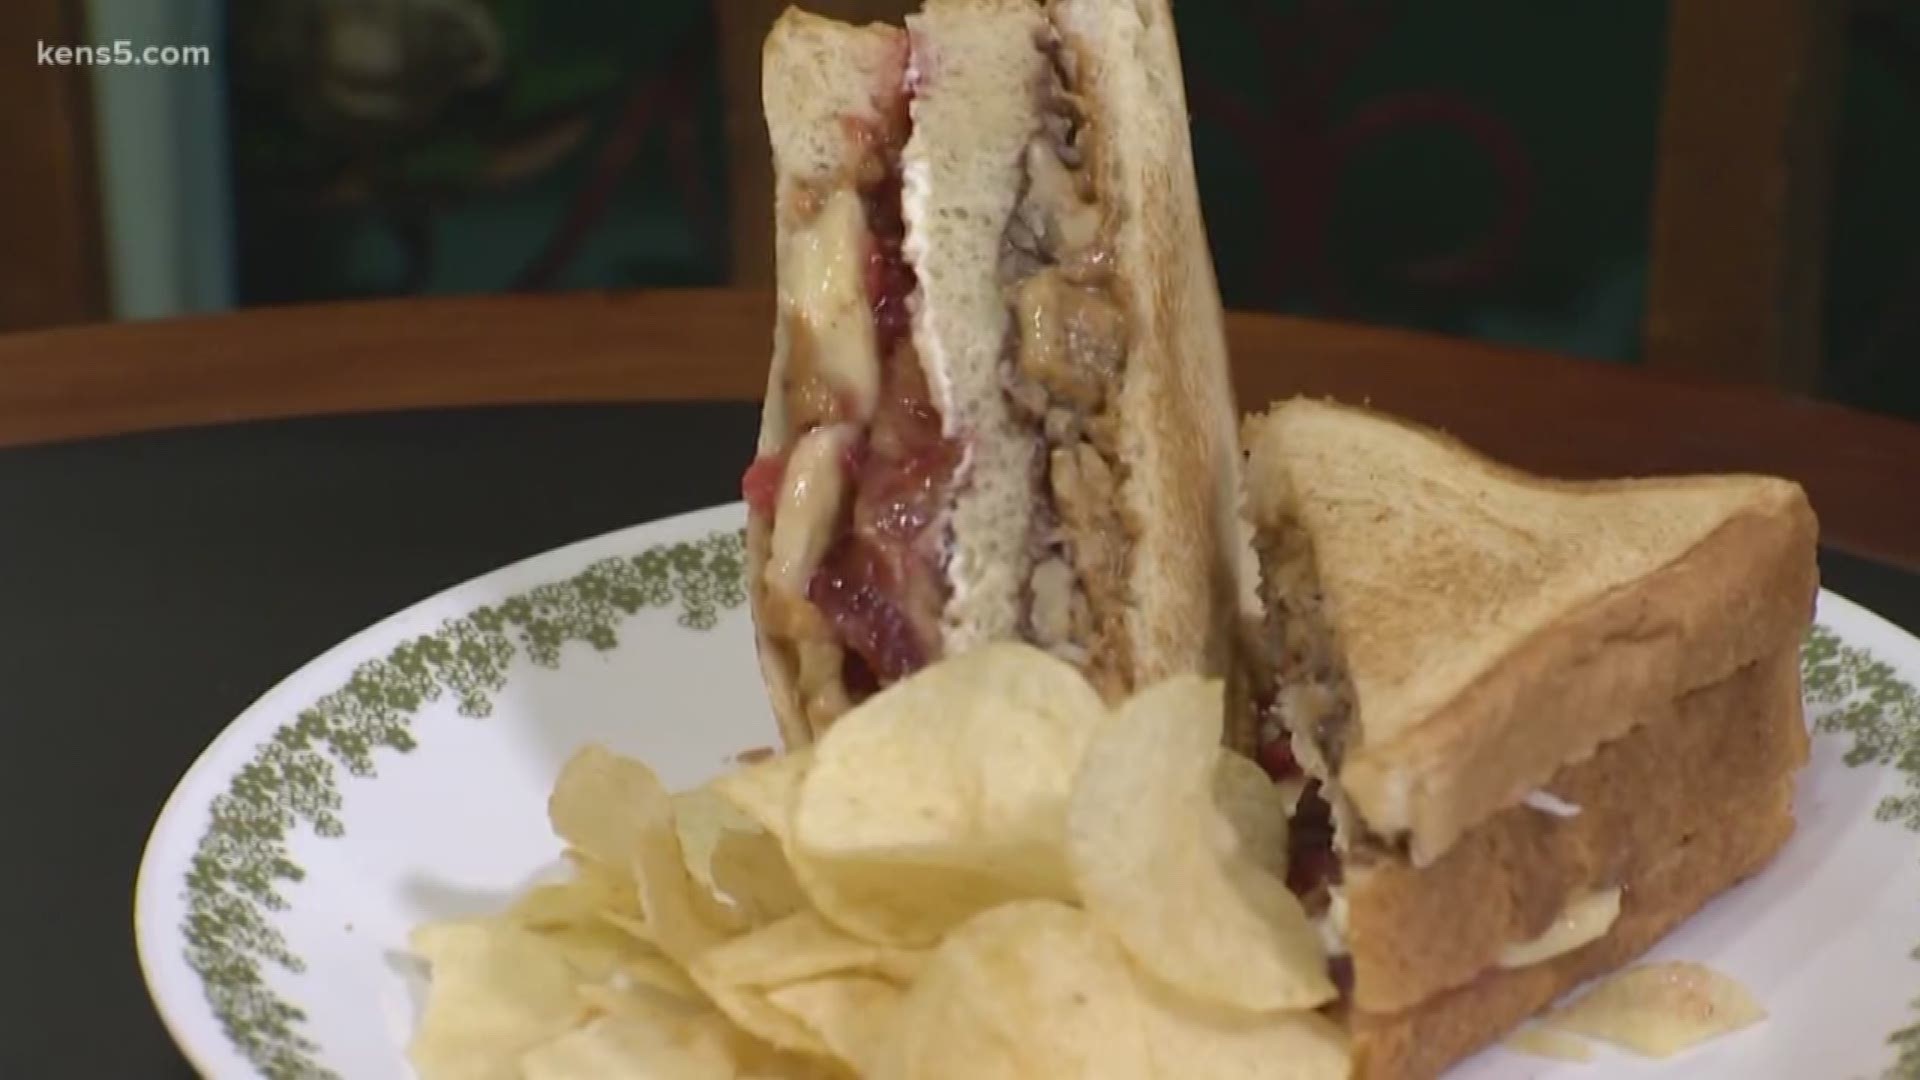 A new spot in SA offers up variations of a childhood classic that still has adults hooked. KENS 5's resident foodie Marvin Hurst introduces us to "PB&J with Tay."